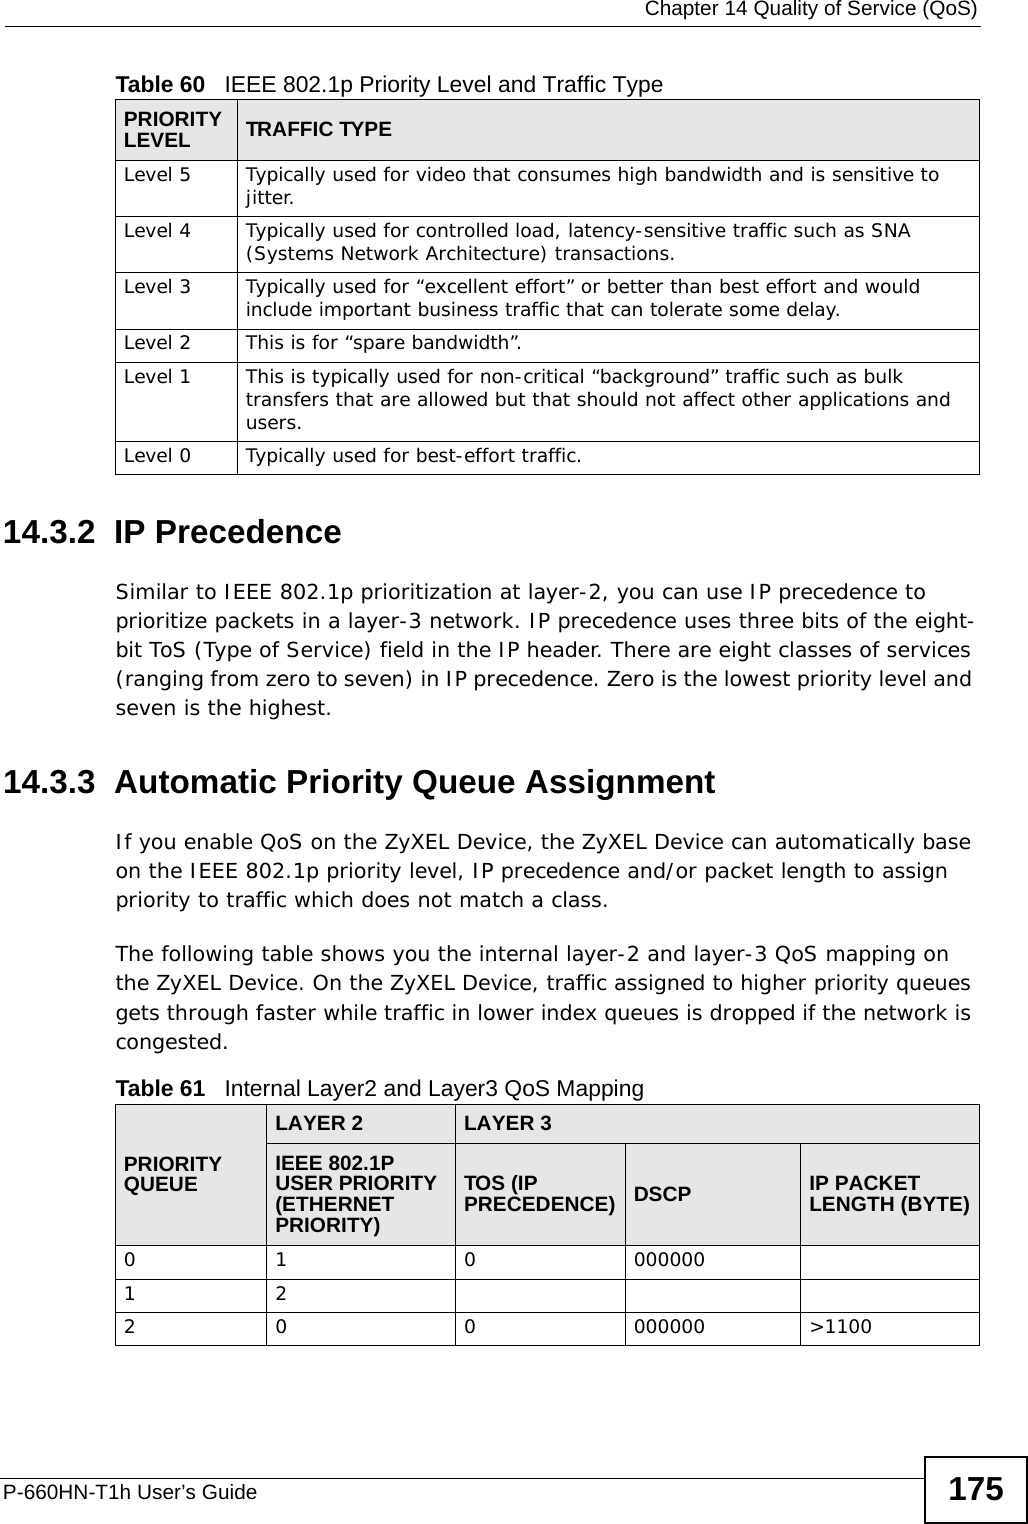  Chapter 14 Quality of Service (QoS)P-660HN-T1h User’s Guide 17514.3.2  IP PrecedenceSimilar to IEEE 802.1p prioritization at layer-2, you can use IP precedence to prioritize packets in a layer-3 network. IP precedence uses three bits of the eight-bit ToS (Type of Service) field in the IP header. There are eight classes of services (ranging from zero to seven) in IP precedence. Zero is the lowest priority level and seven is the highest.14.3.3  Automatic Priority Queue AssignmentIf you enable QoS on the ZyXEL Device, the ZyXEL Device can automatically base on the IEEE 802.1p priority level, IP precedence and/or packet length to assign priority to traffic which does not match a class.The following table shows you the internal layer-2 and layer-3 QoS mapping on the ZyXEL Device. On the ZyXEL Device, traffic assigned to higher priority queues gets through faster while traffic in lower index queues is dropped if the network is congested.Level 5 Typically used for video that consumes high bandwidth and is sensitive to jitter.Level 4 Typically used for controlled load, latency-sensitive traffic such as SNA (Systems Network Architecture) transactions.Level 3 Typically used for “excellent effort” or better than best effort and would include important business traffic that can tolerate some delay.Level 2 This is for “spare bandwidth”. Level 1 This is typically used for non-critical “background” traffic such as bulk transfers that are allowed but that should not affect other applications and users. Level 0 Typically used for best-effort traffic.Table 60   IEEE 802.1p Priority Level and Traffic TypePRIORITY LEVEL TRAFFIC TYPETable 61   Internal Layer2 and Layer3 QoS MappingPRIORITY QUEUELAYER 2 LAYER 3IEEE 802.1P USER PRIORITY (ETHERNET PRIORITY)TOS (IP PRECEDENCE) DSCP IP PACKET LENGTH (BYTE)0 1 0 000000122 0 0 000000 &gt;1100